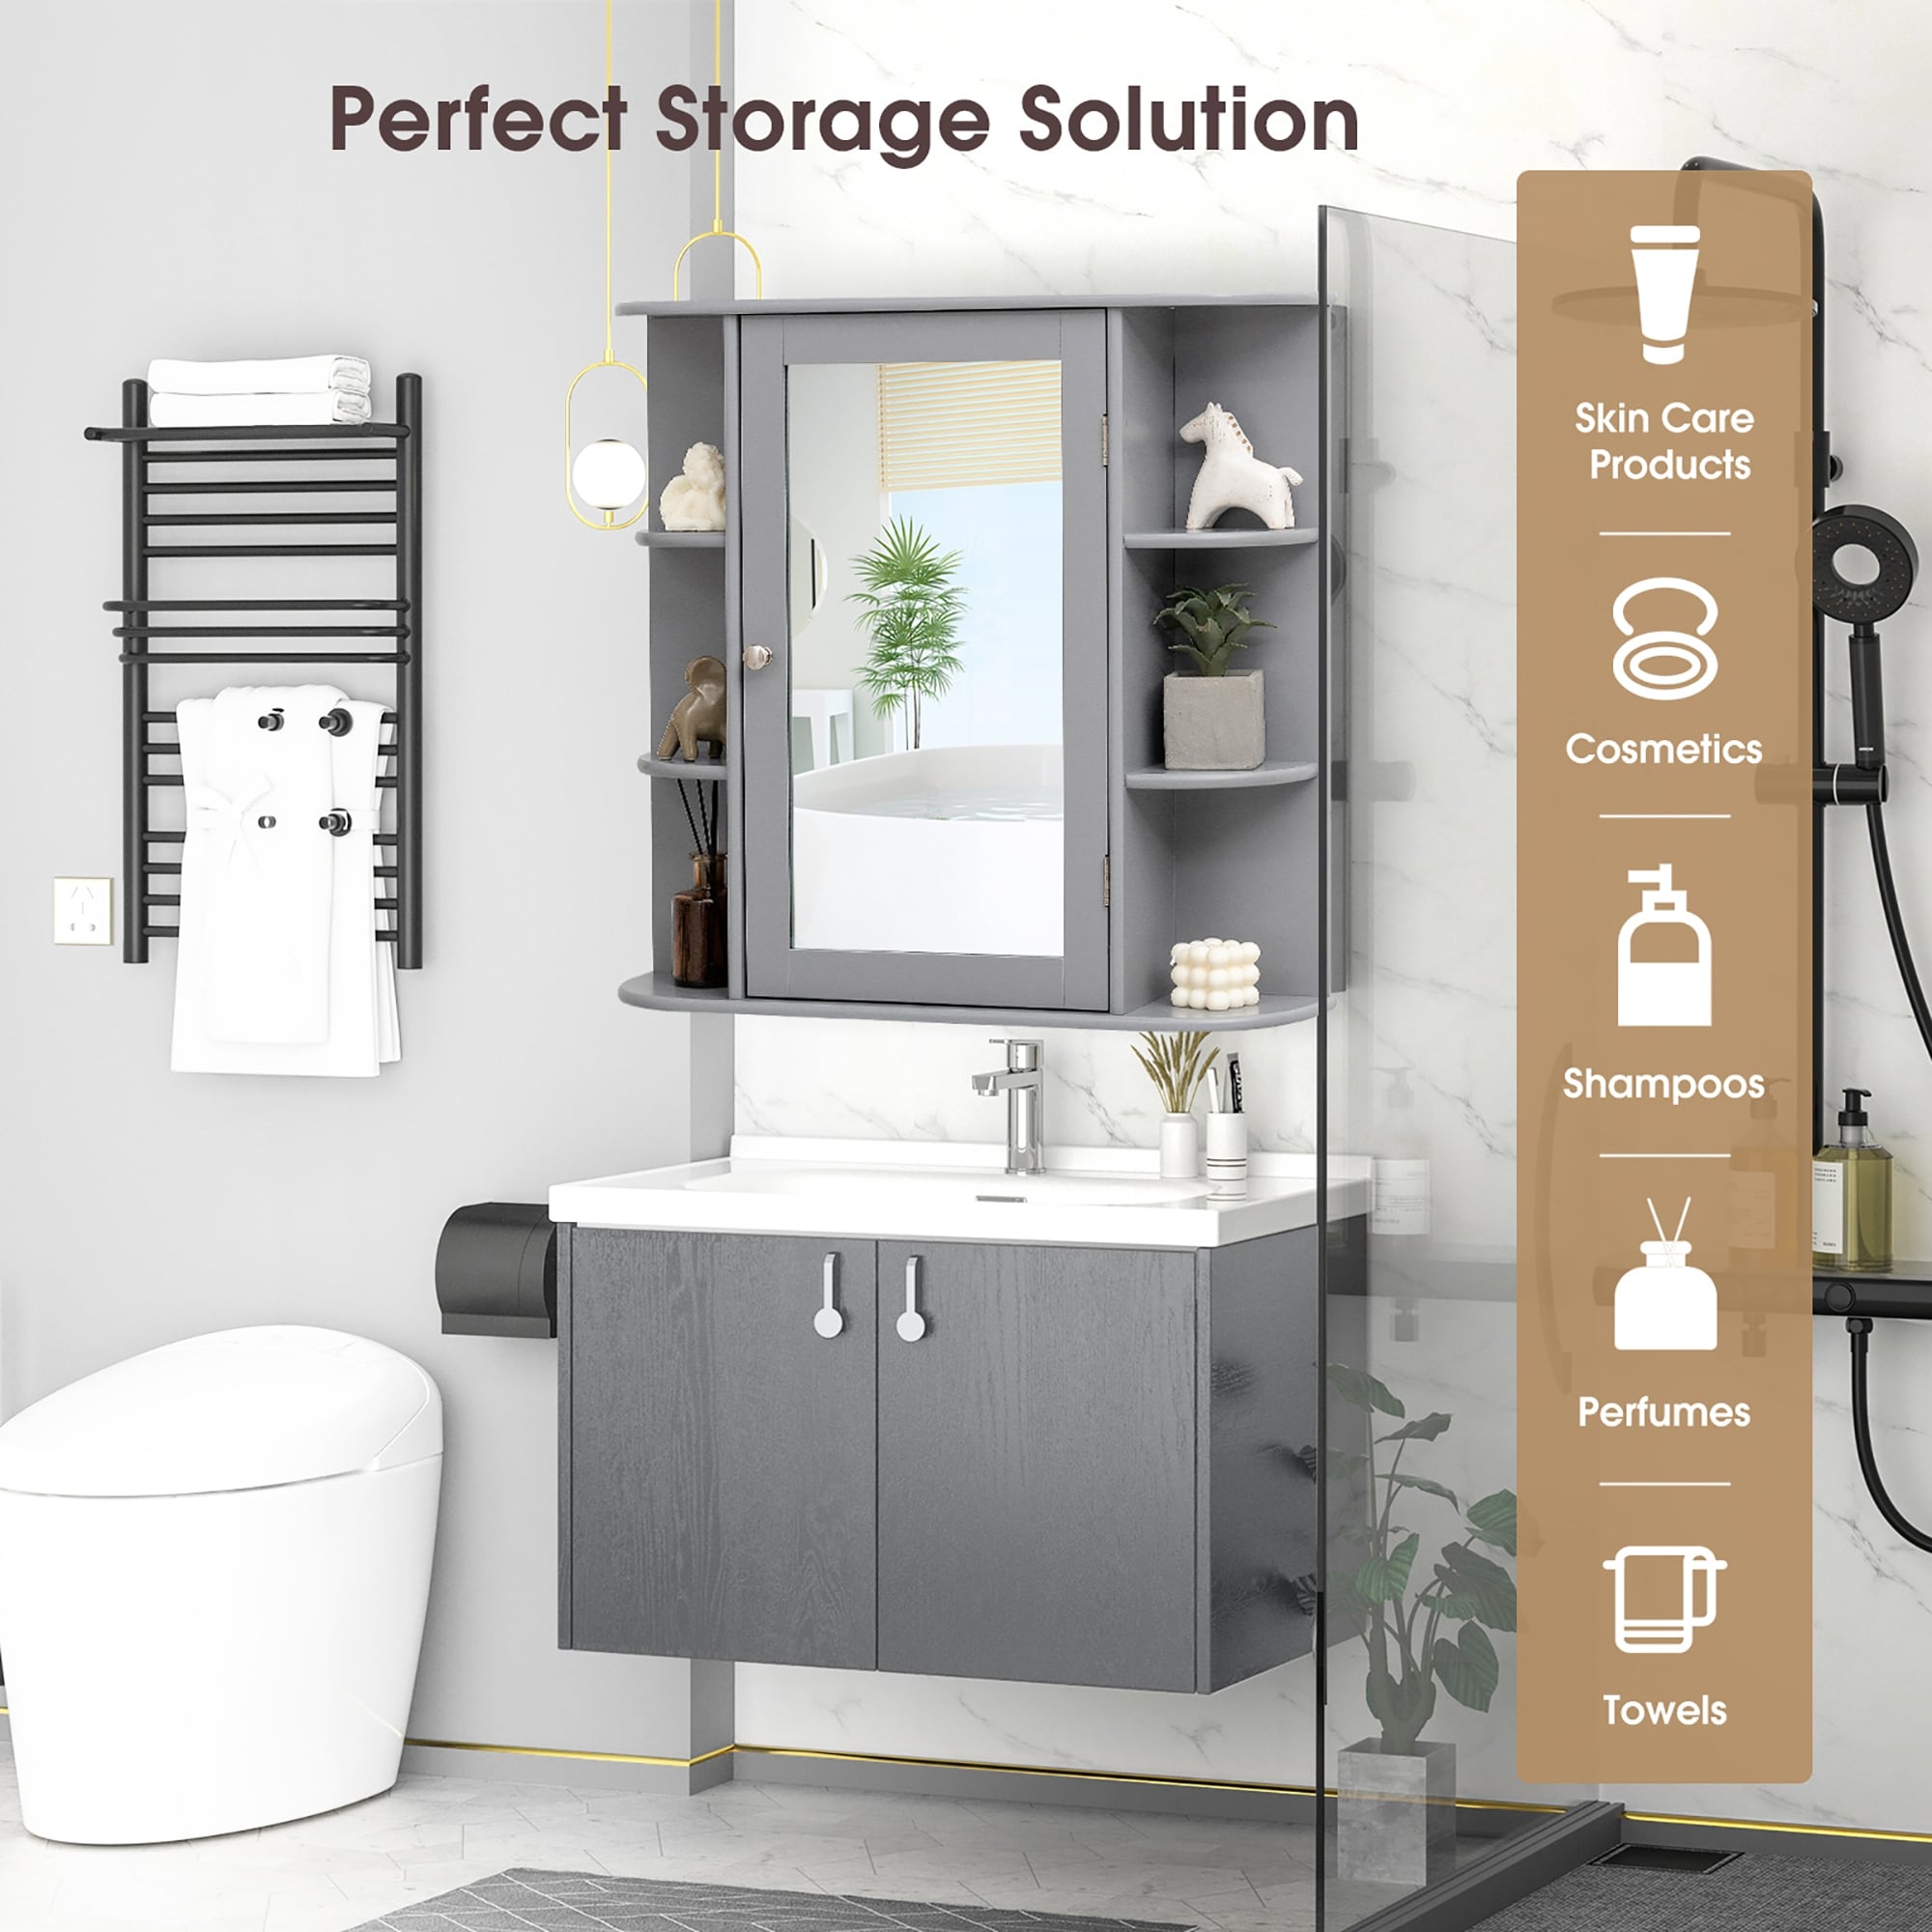 https://ak1.ostkcdn.com/images/products/is/images/direct/41fec508100ceaef554a7462e8011e713dcc0564/Wall-Mounted-Bathroom-Storage-Cabinet-Medicine-Cabinet-with-Mirror.jpg